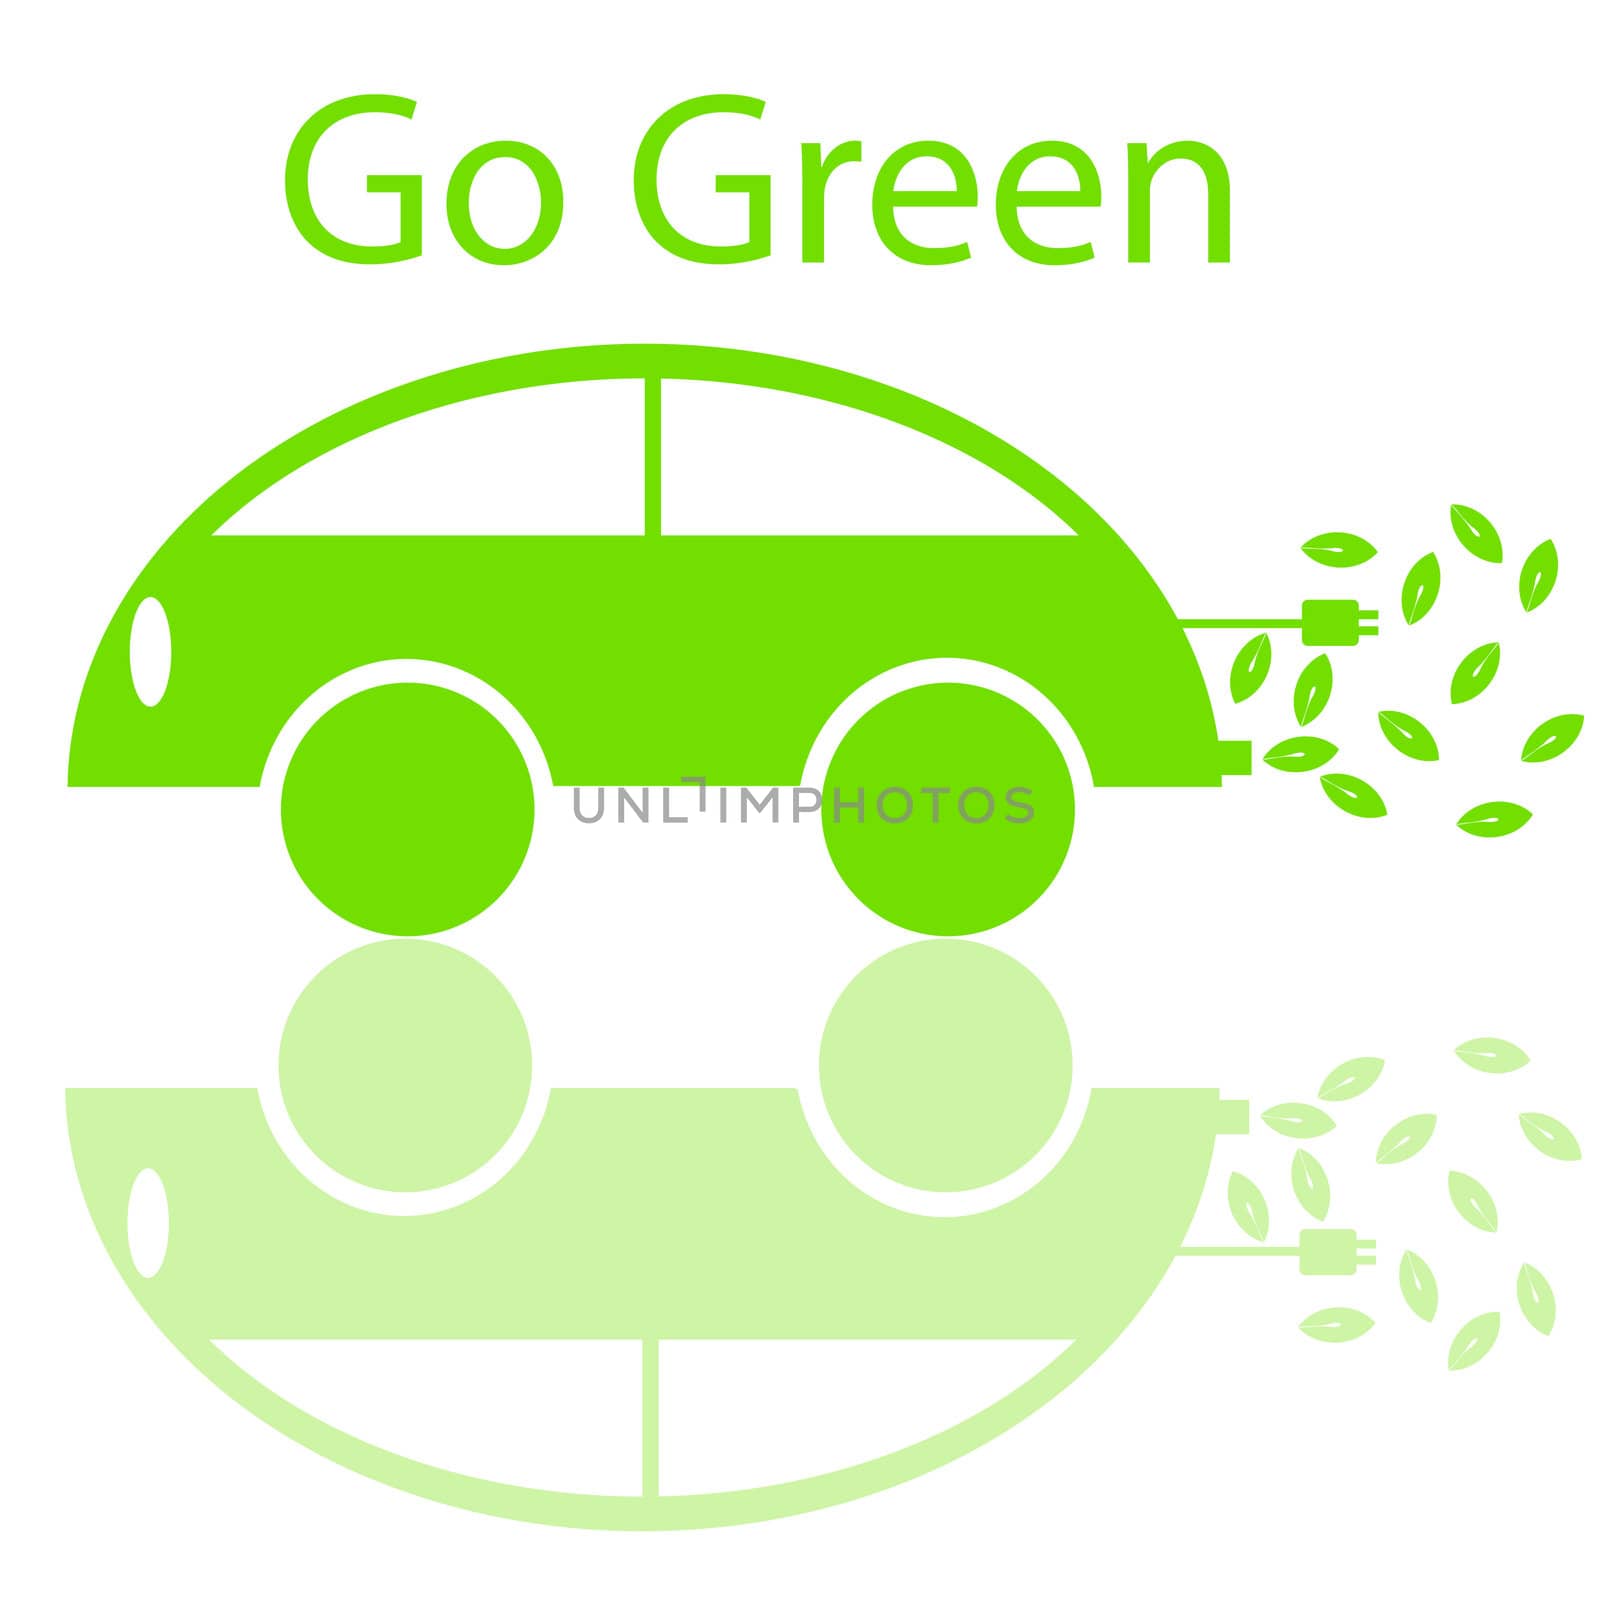 Go Green Eco Friendly Electric Car with Electrical Plug and Leaf Illustration